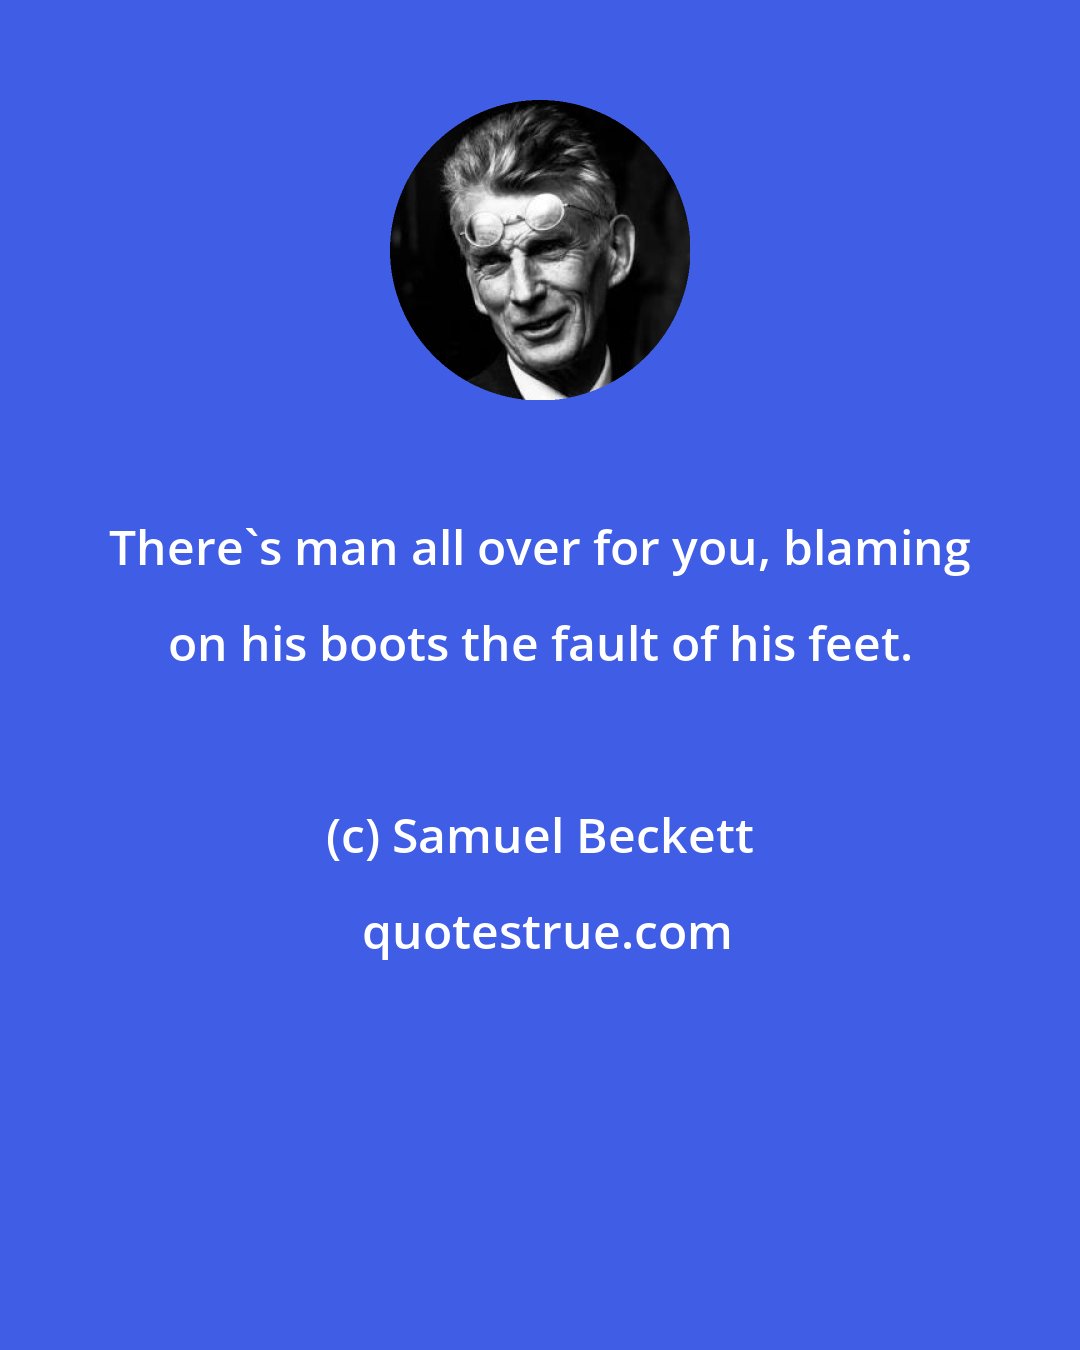 Samuel Beckett: There's man all over for you, blaming on his boots the fault of his feet.